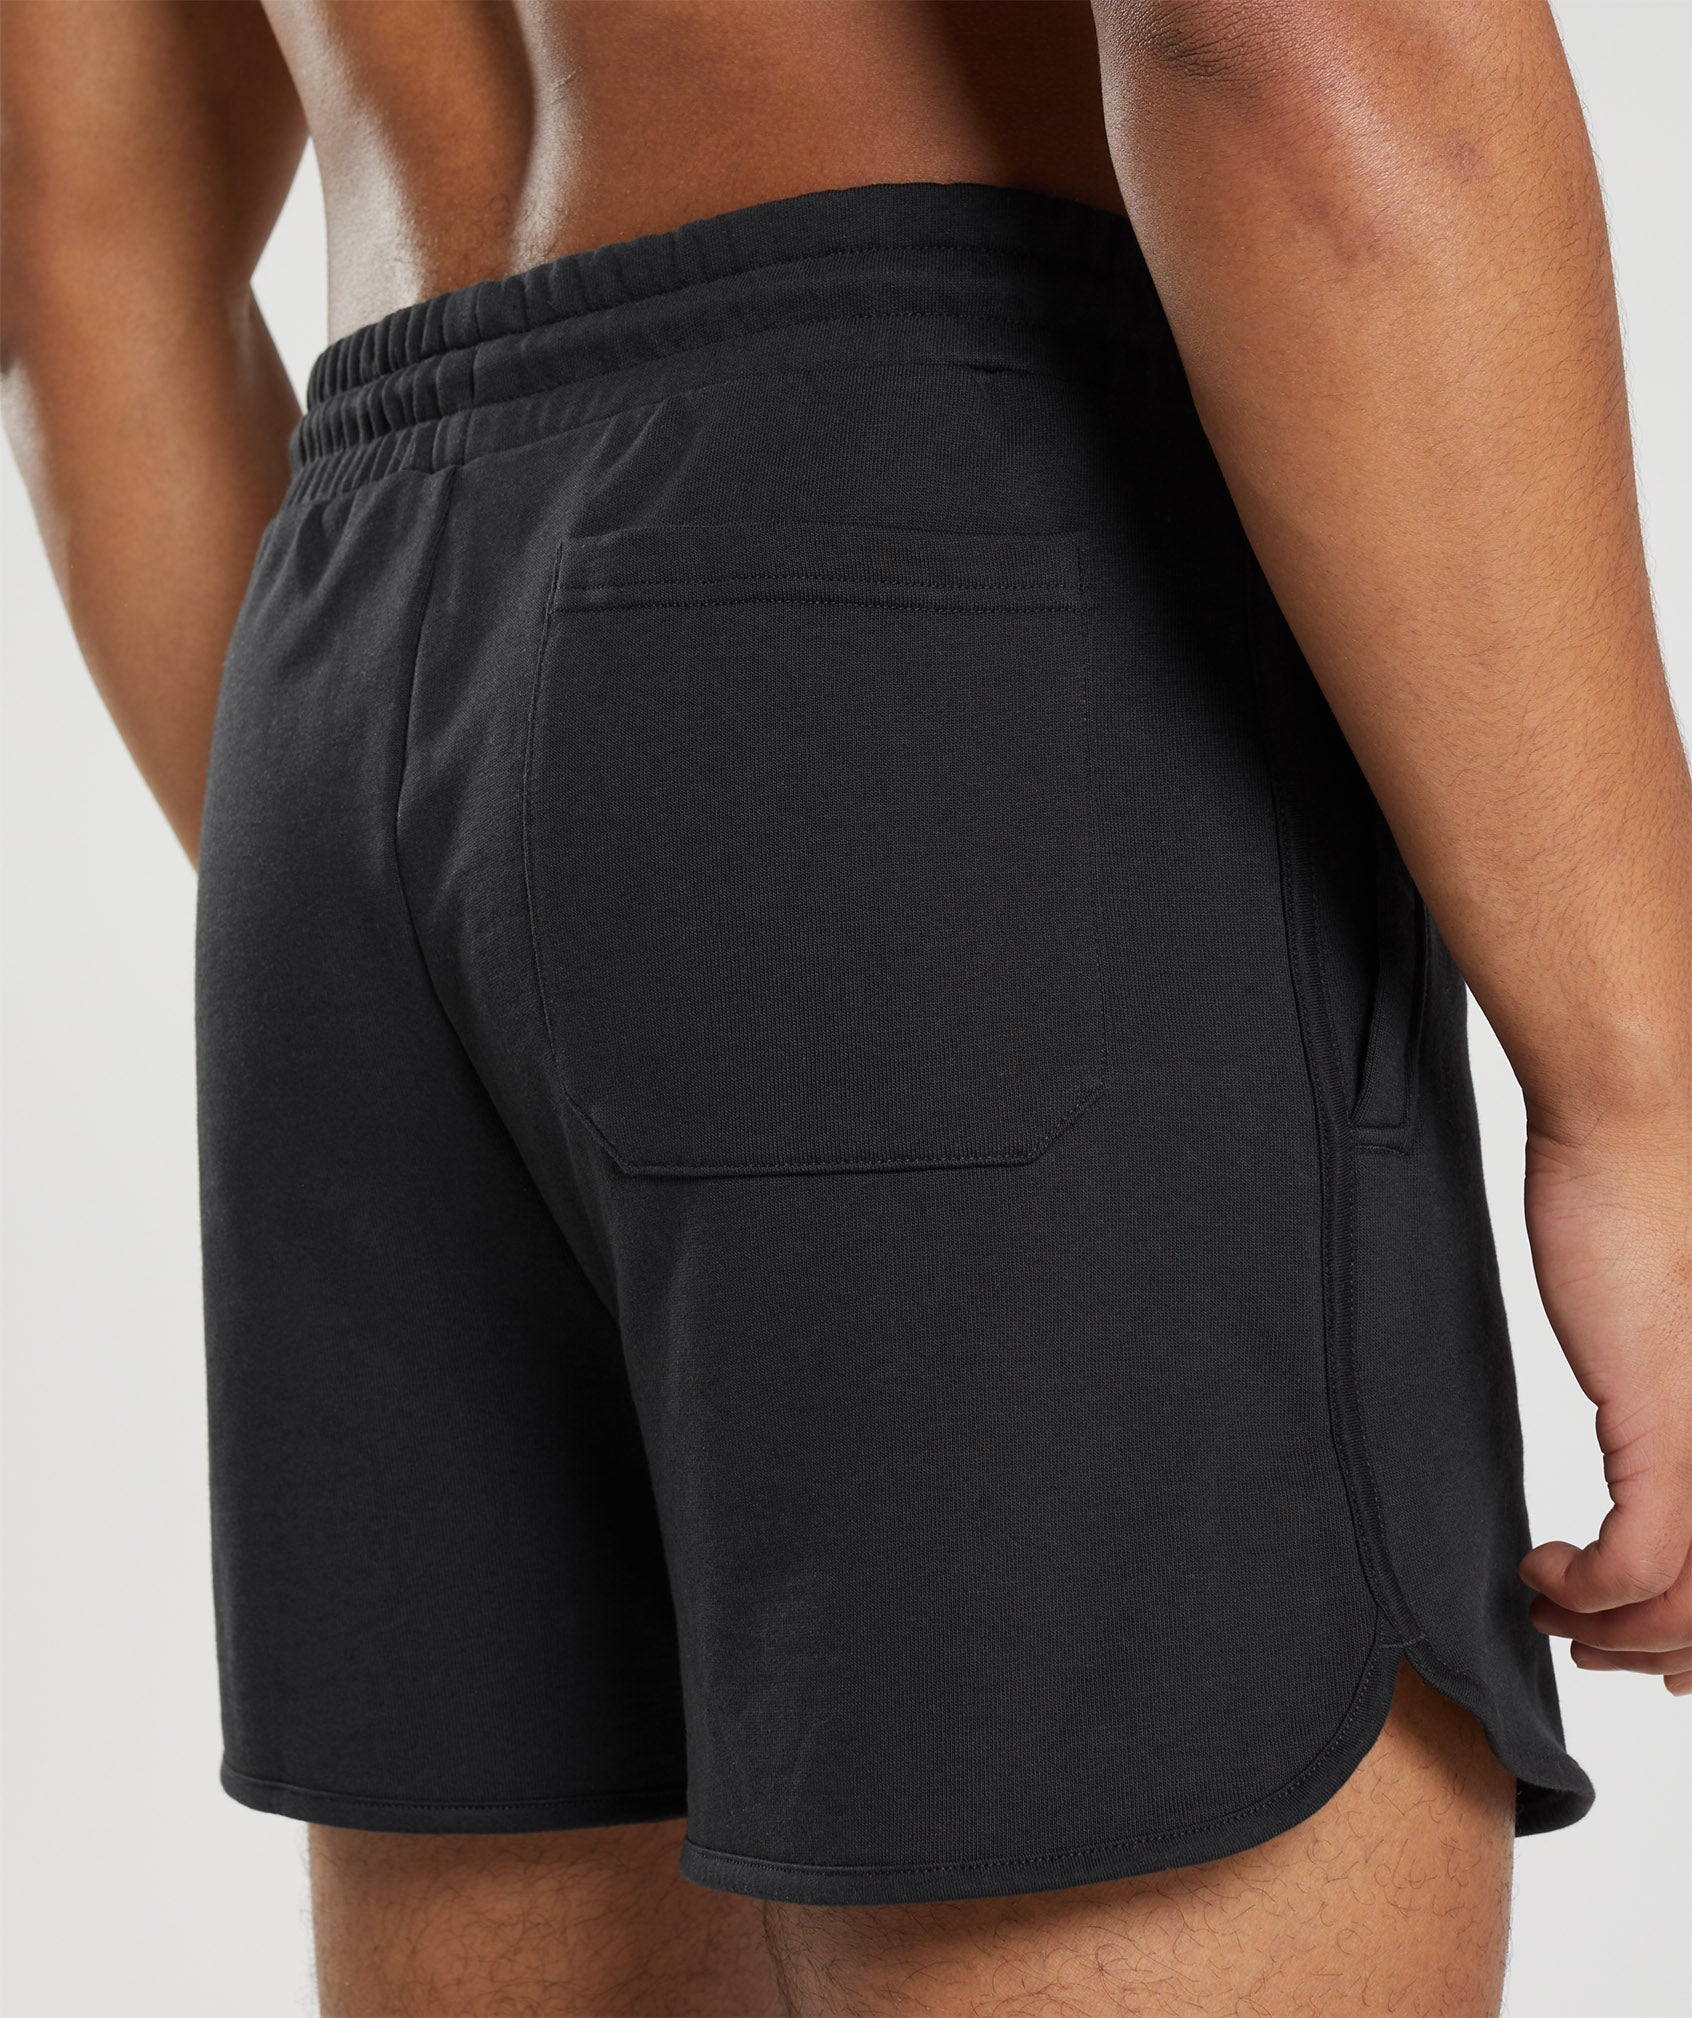 Rest Day Sweats 4'' Lounge Shorts in Black